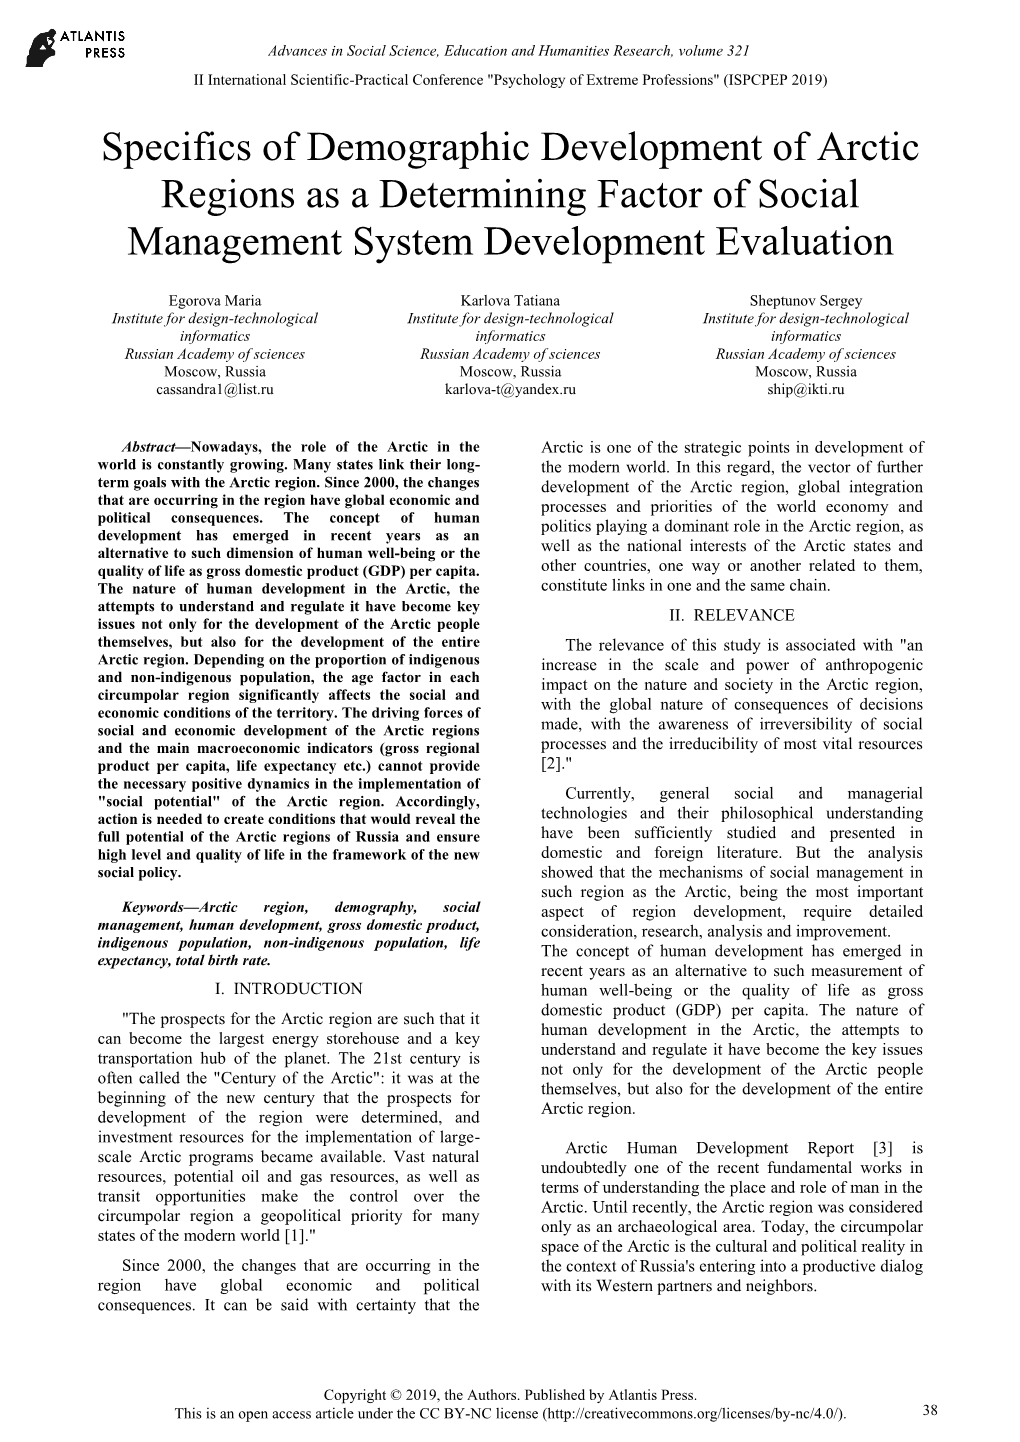 Specifics of Demographic Development of Arctic Regions As a Determining Factor of Social Management System Development Evaluation